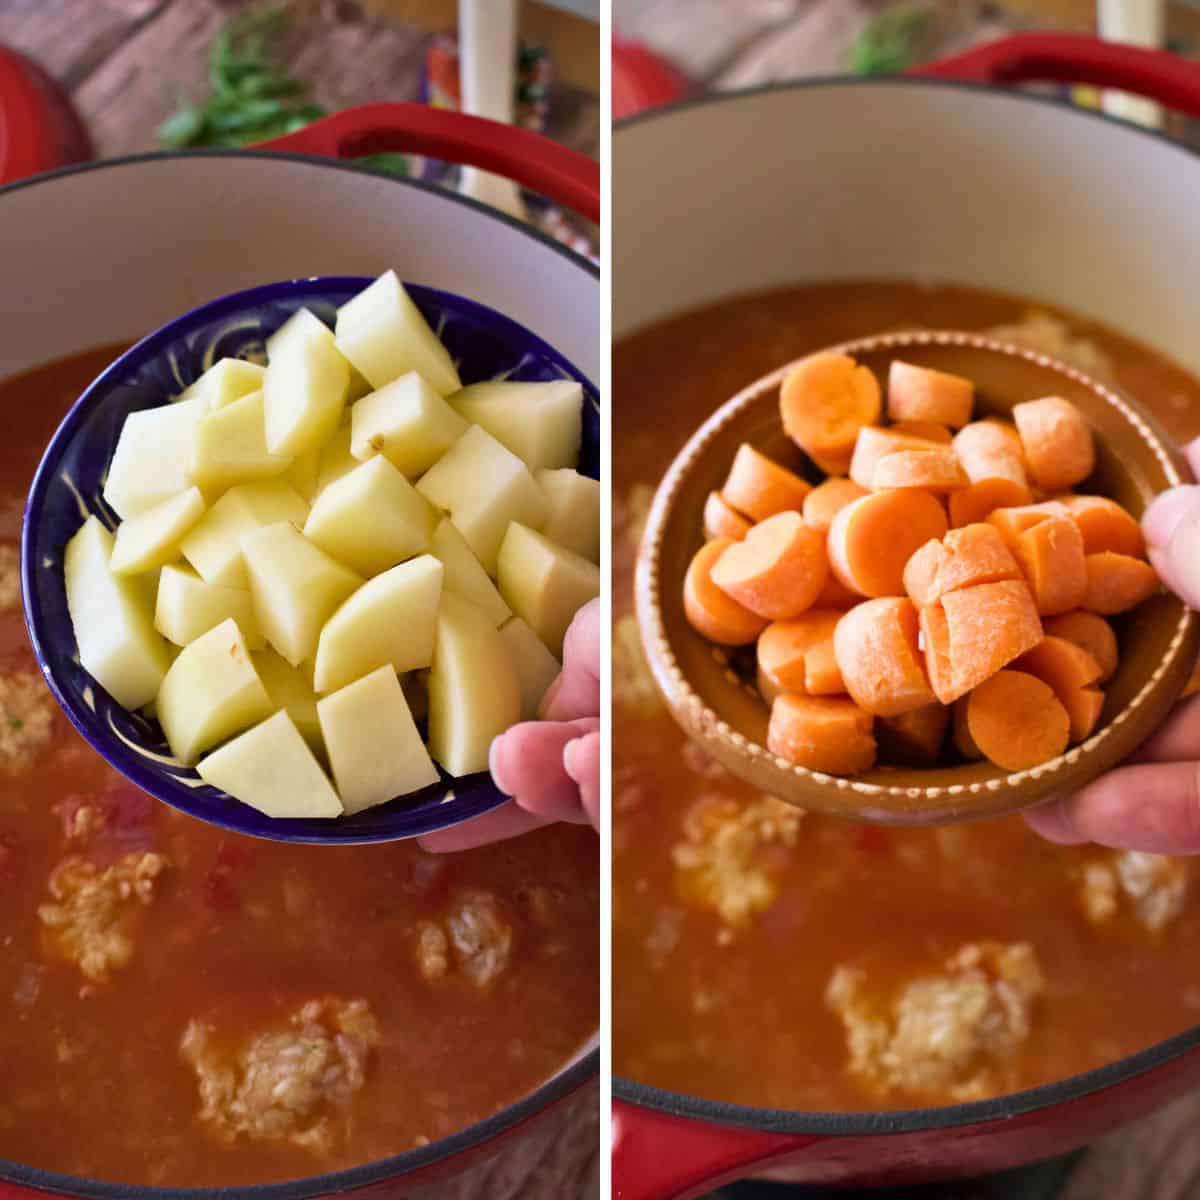 Carrots and potatoes being put in a stock pot.